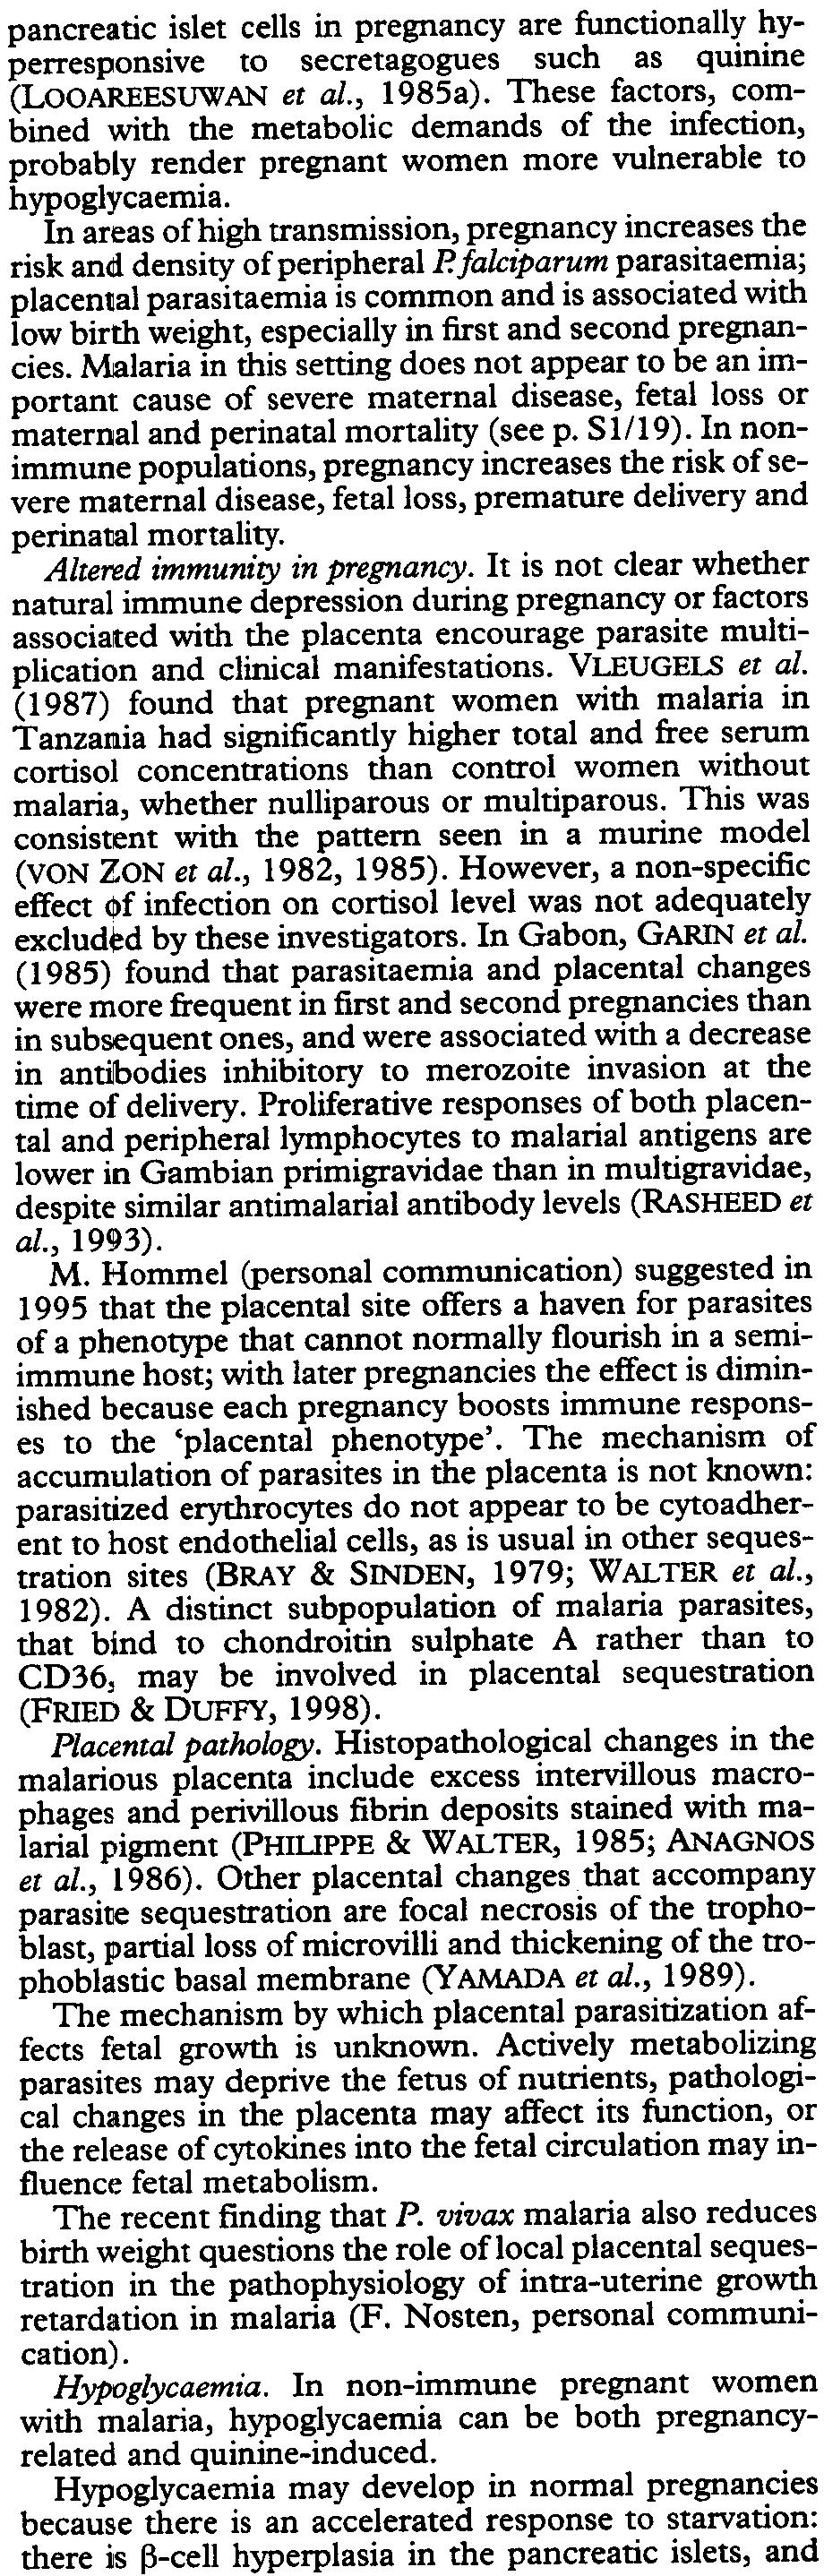 (1987) found that pregnant women with malaria in Tanzamia had significantly higher total and free serum cortisol concentrations than control women without malaria, whether nulliparous or multiparous.